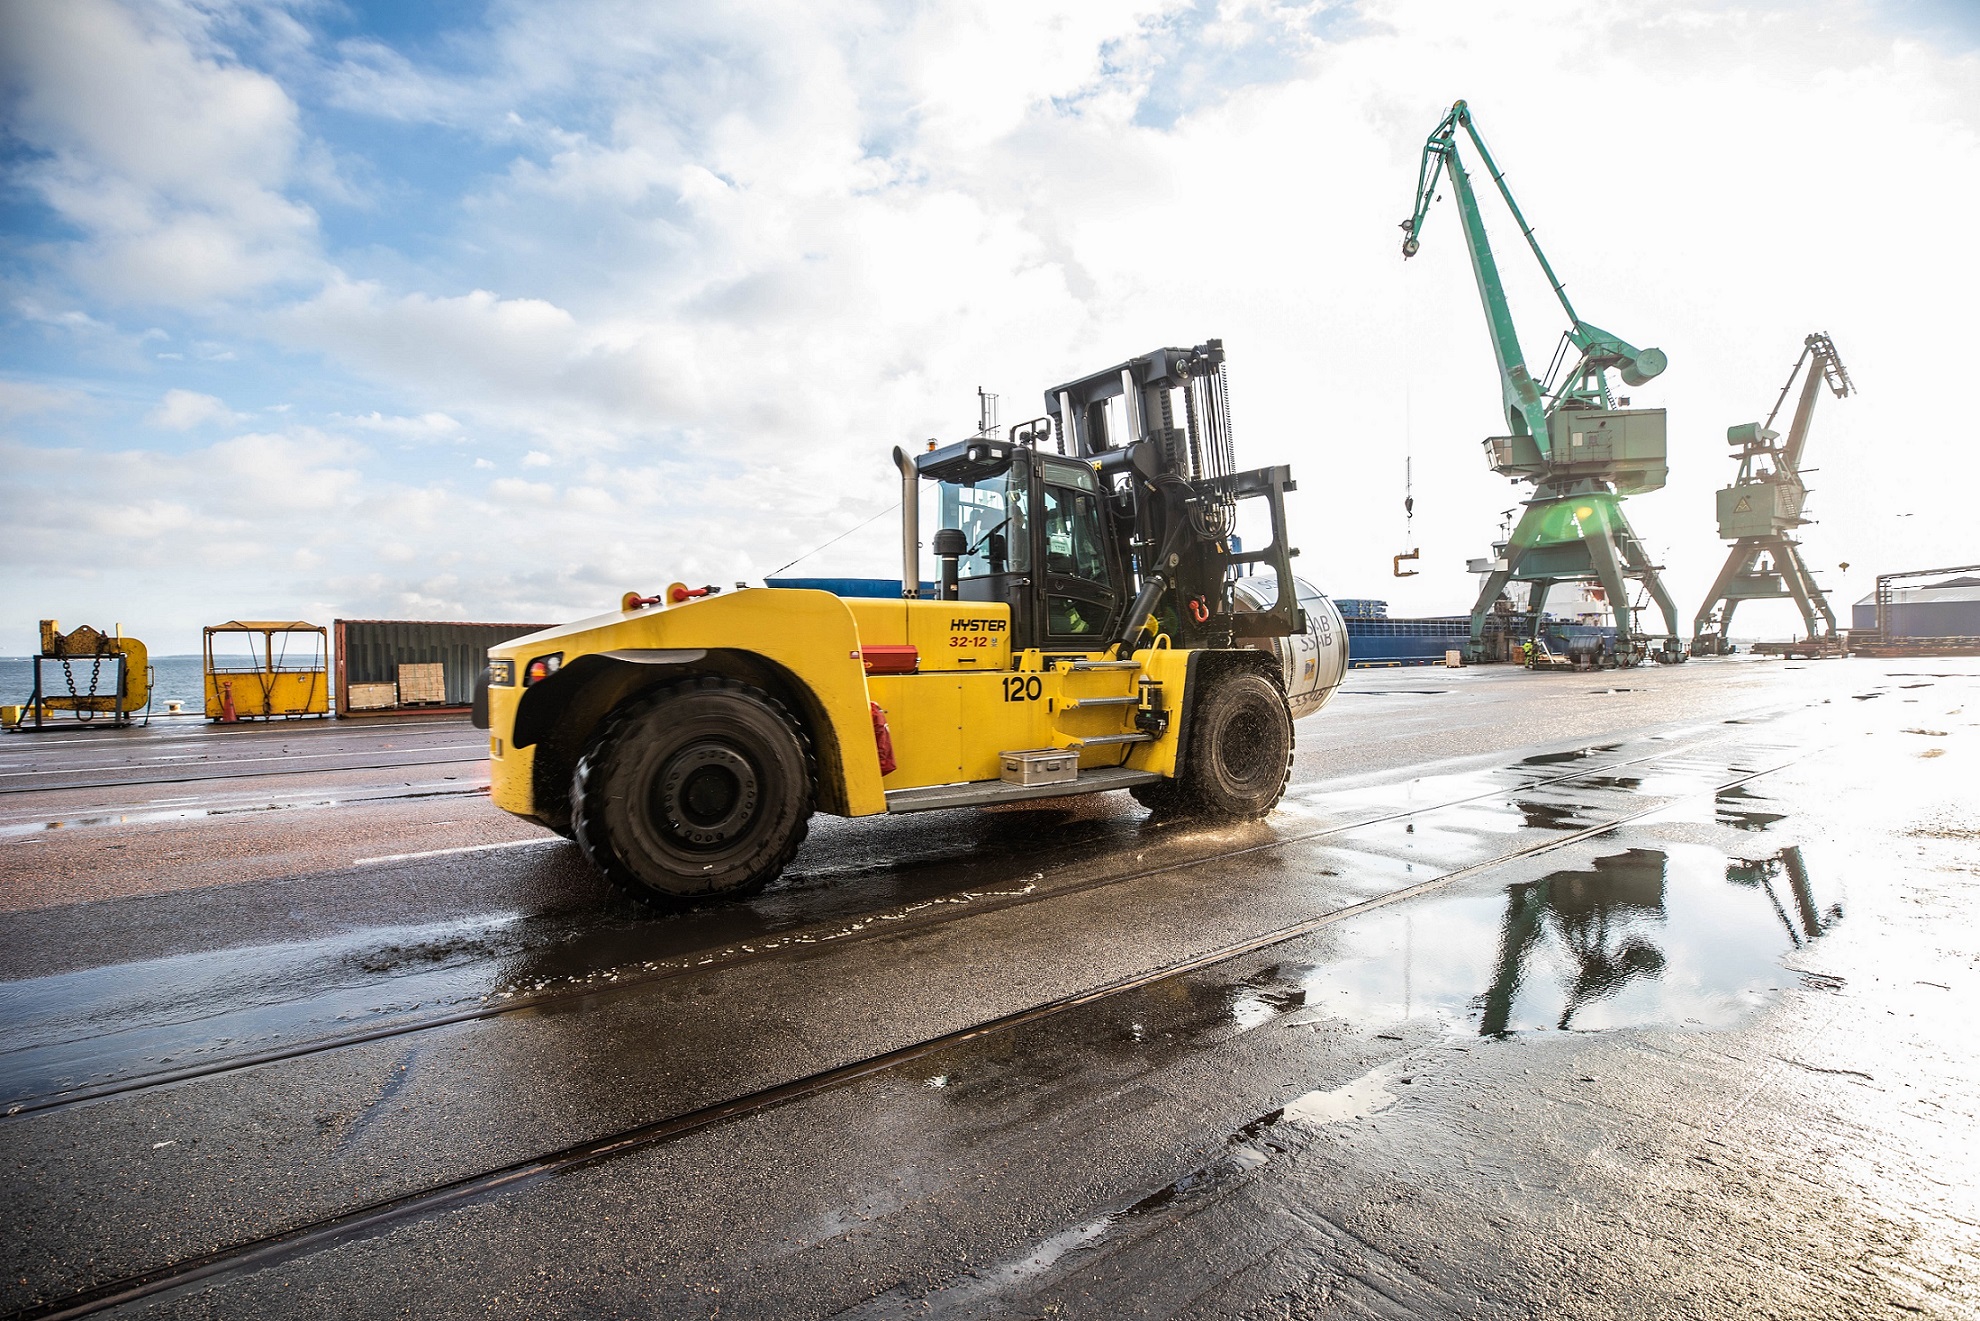 Hyster® telematics keeps lift truck drivers on track for heavy metal handling